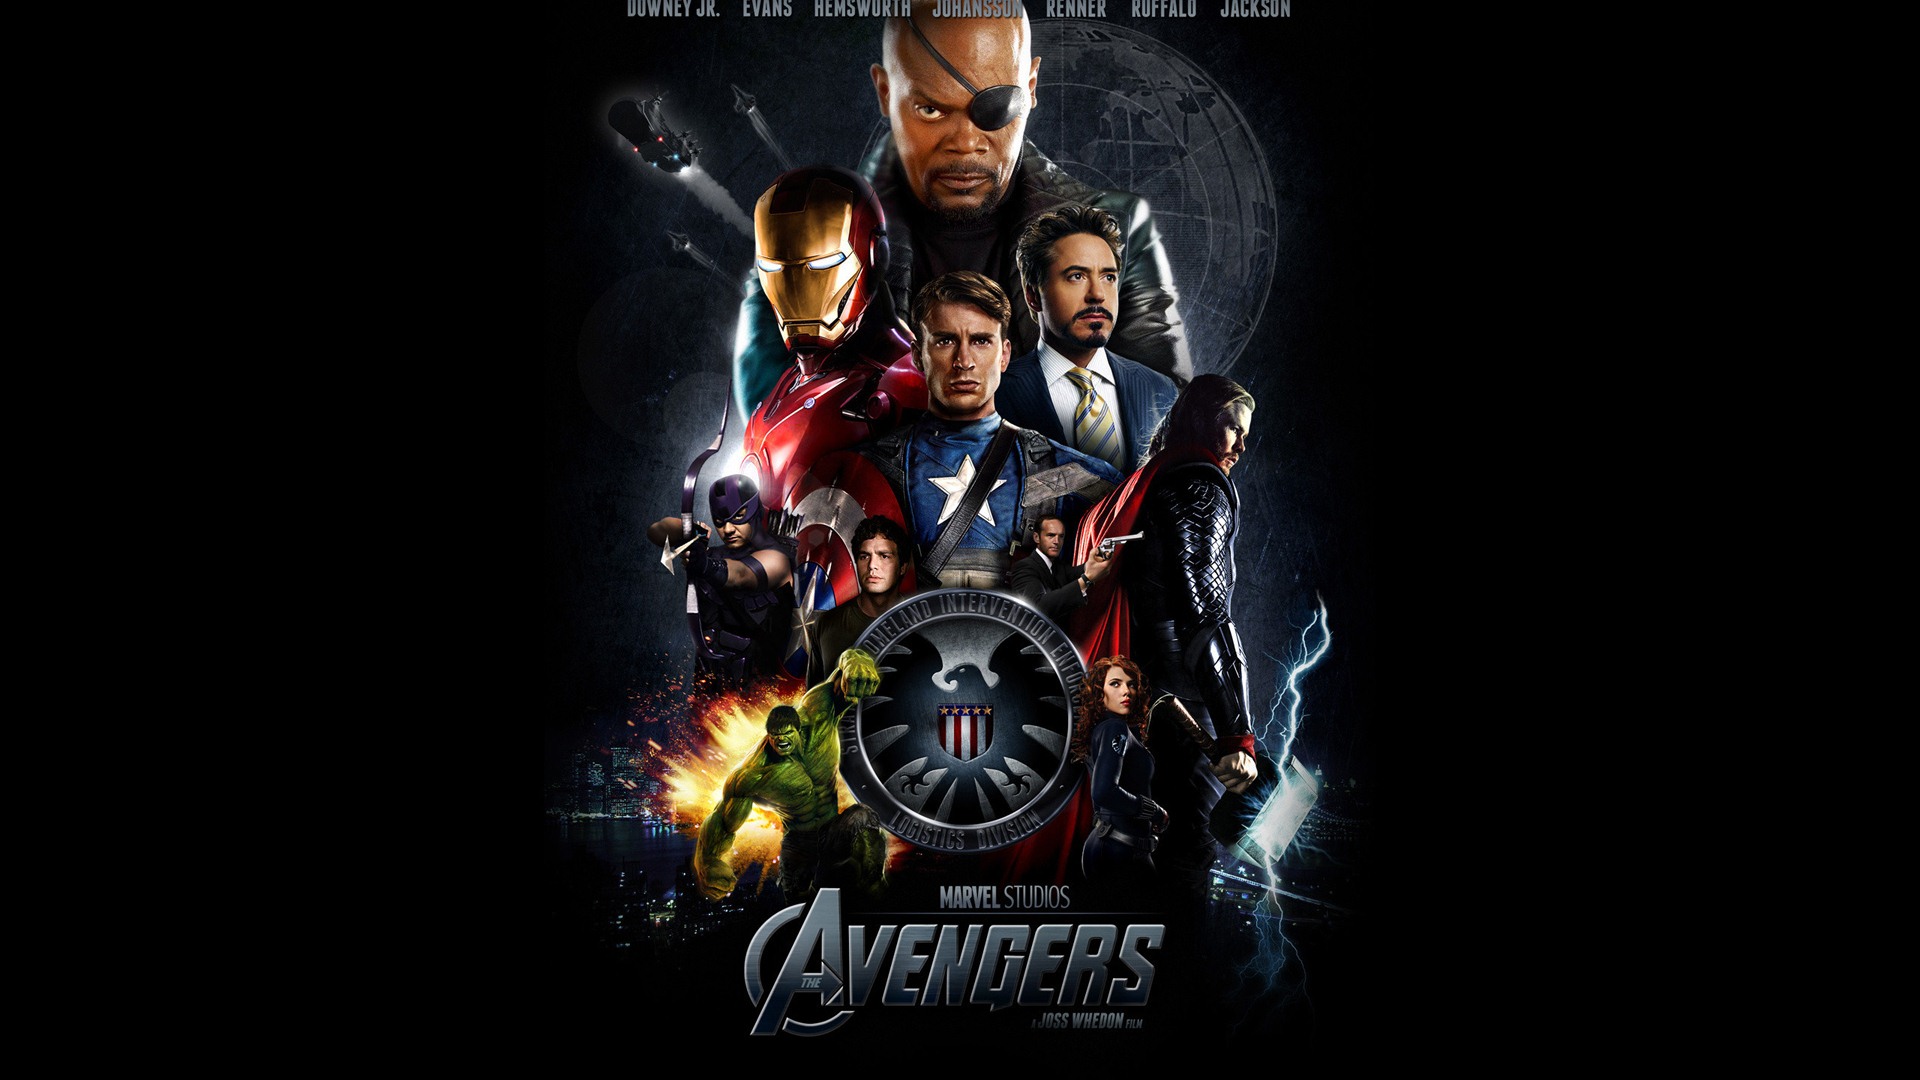 The Avengers 2012 HD wallpapers #16 - 1920x1080